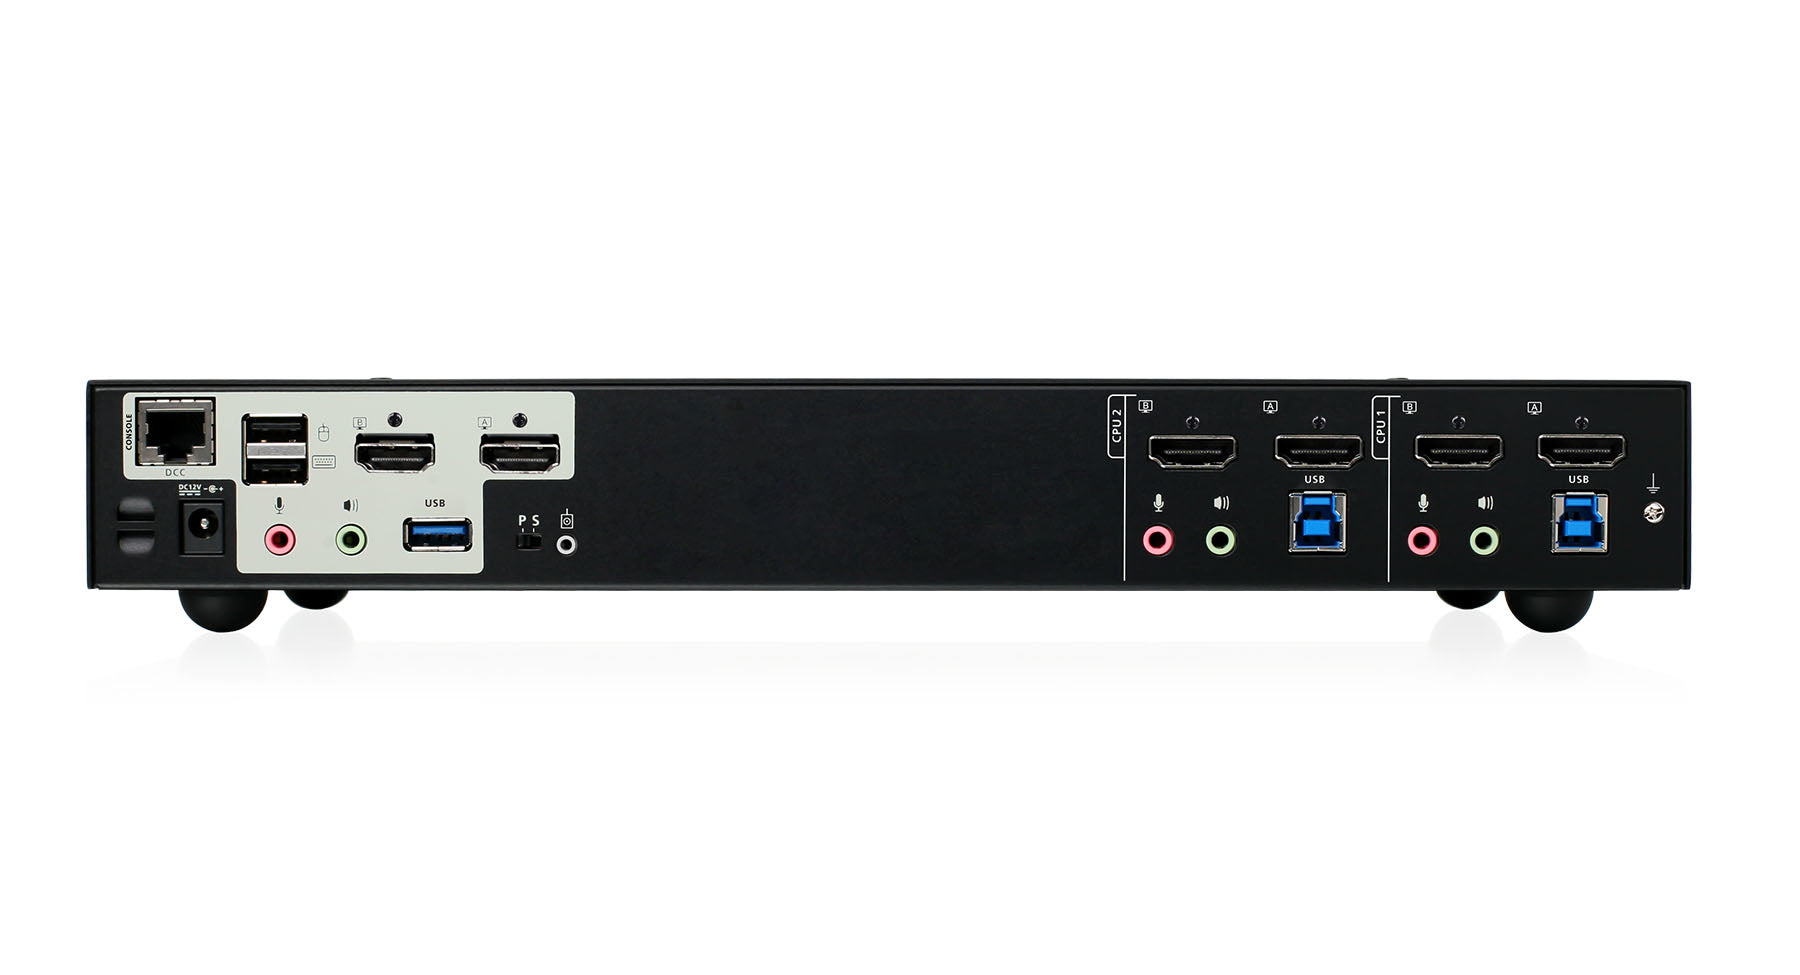 2-Port 4K Dual View KVMP Switch with HDMI Connection, USB 3.0 Hub and Audio (TAA)